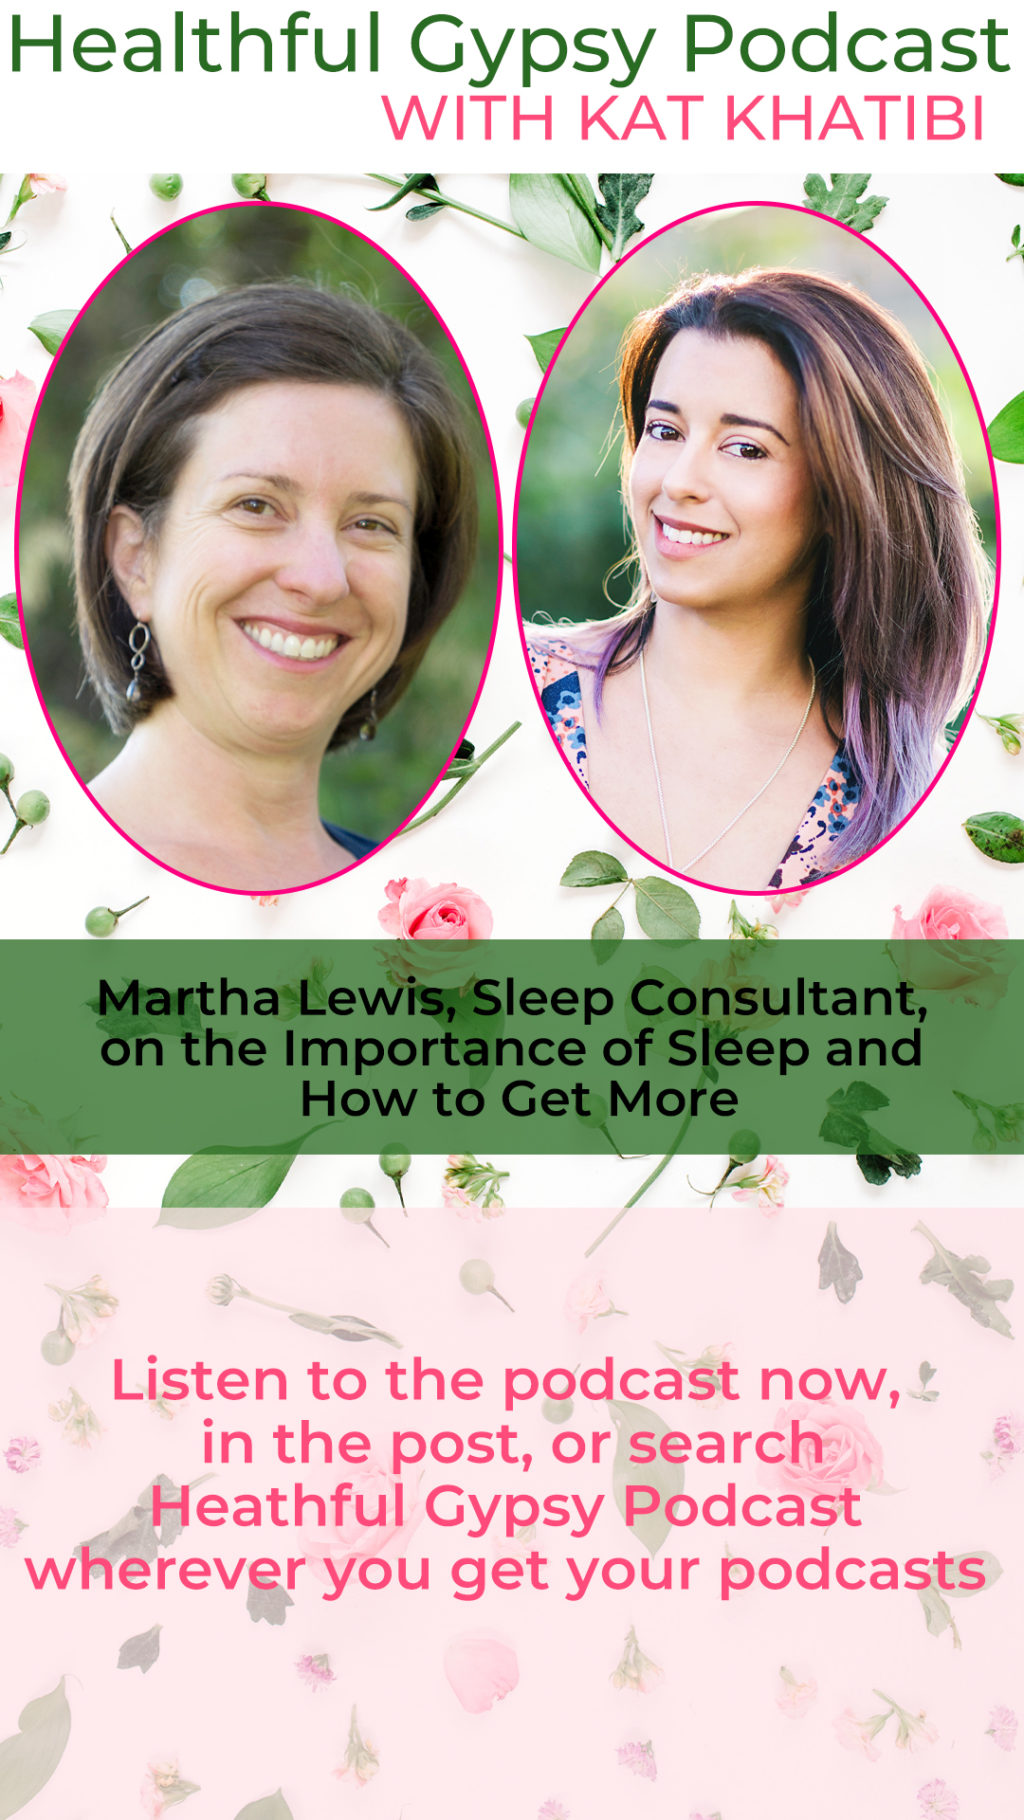 Martha Lewis, Sleep Consultant, on the Importance of Sleep and How to Get More